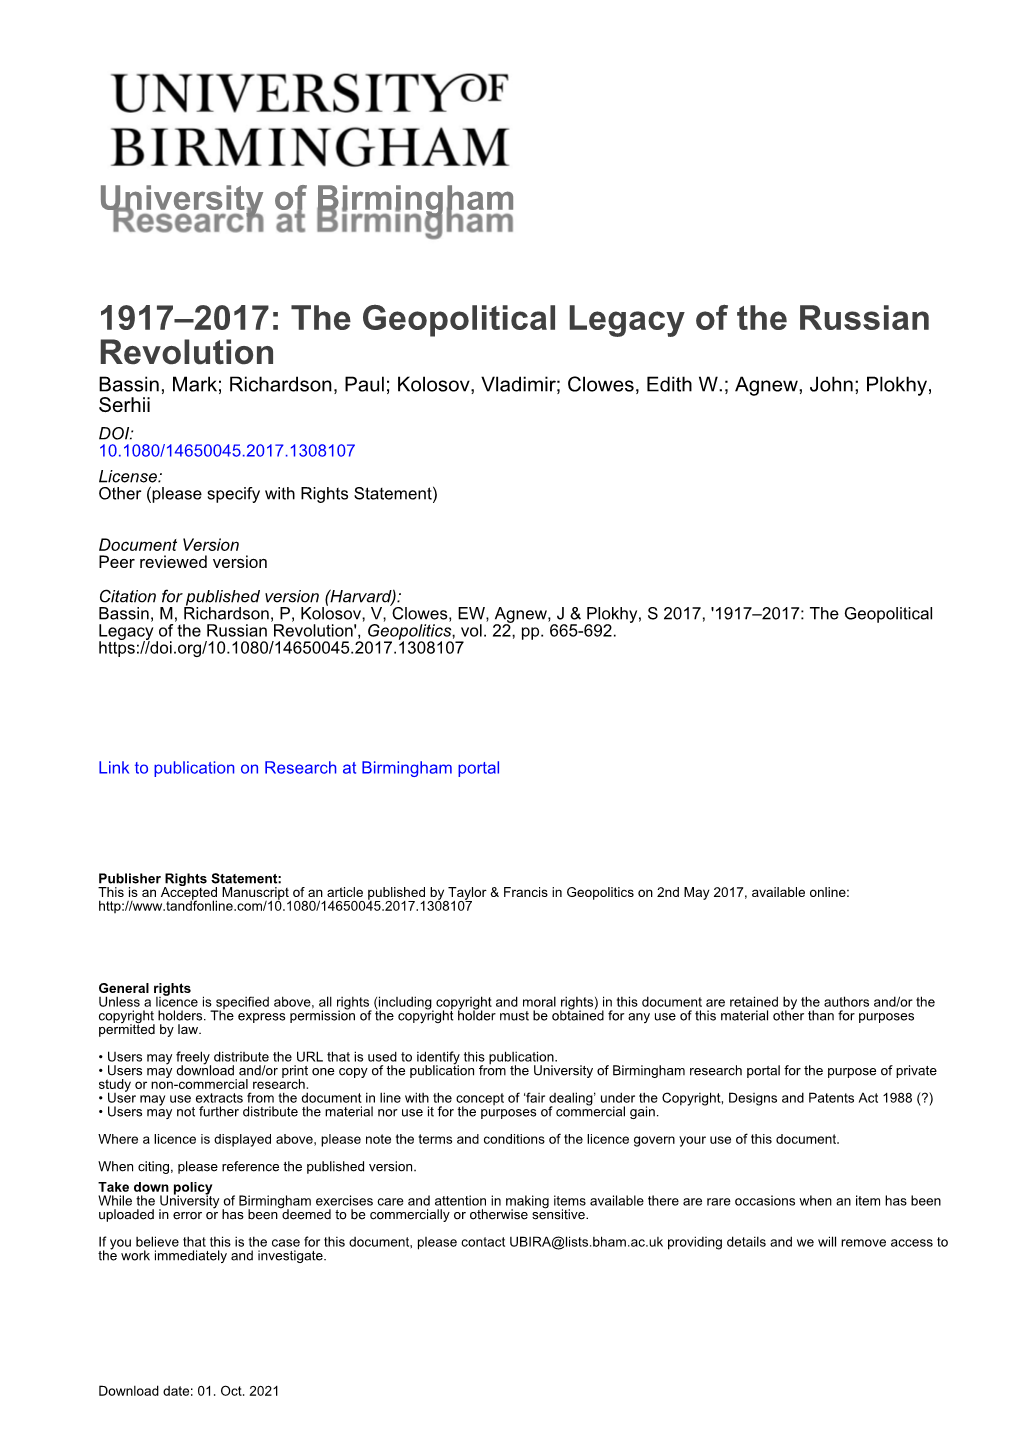 The Geopolitical Legacy of the Russian Revolution